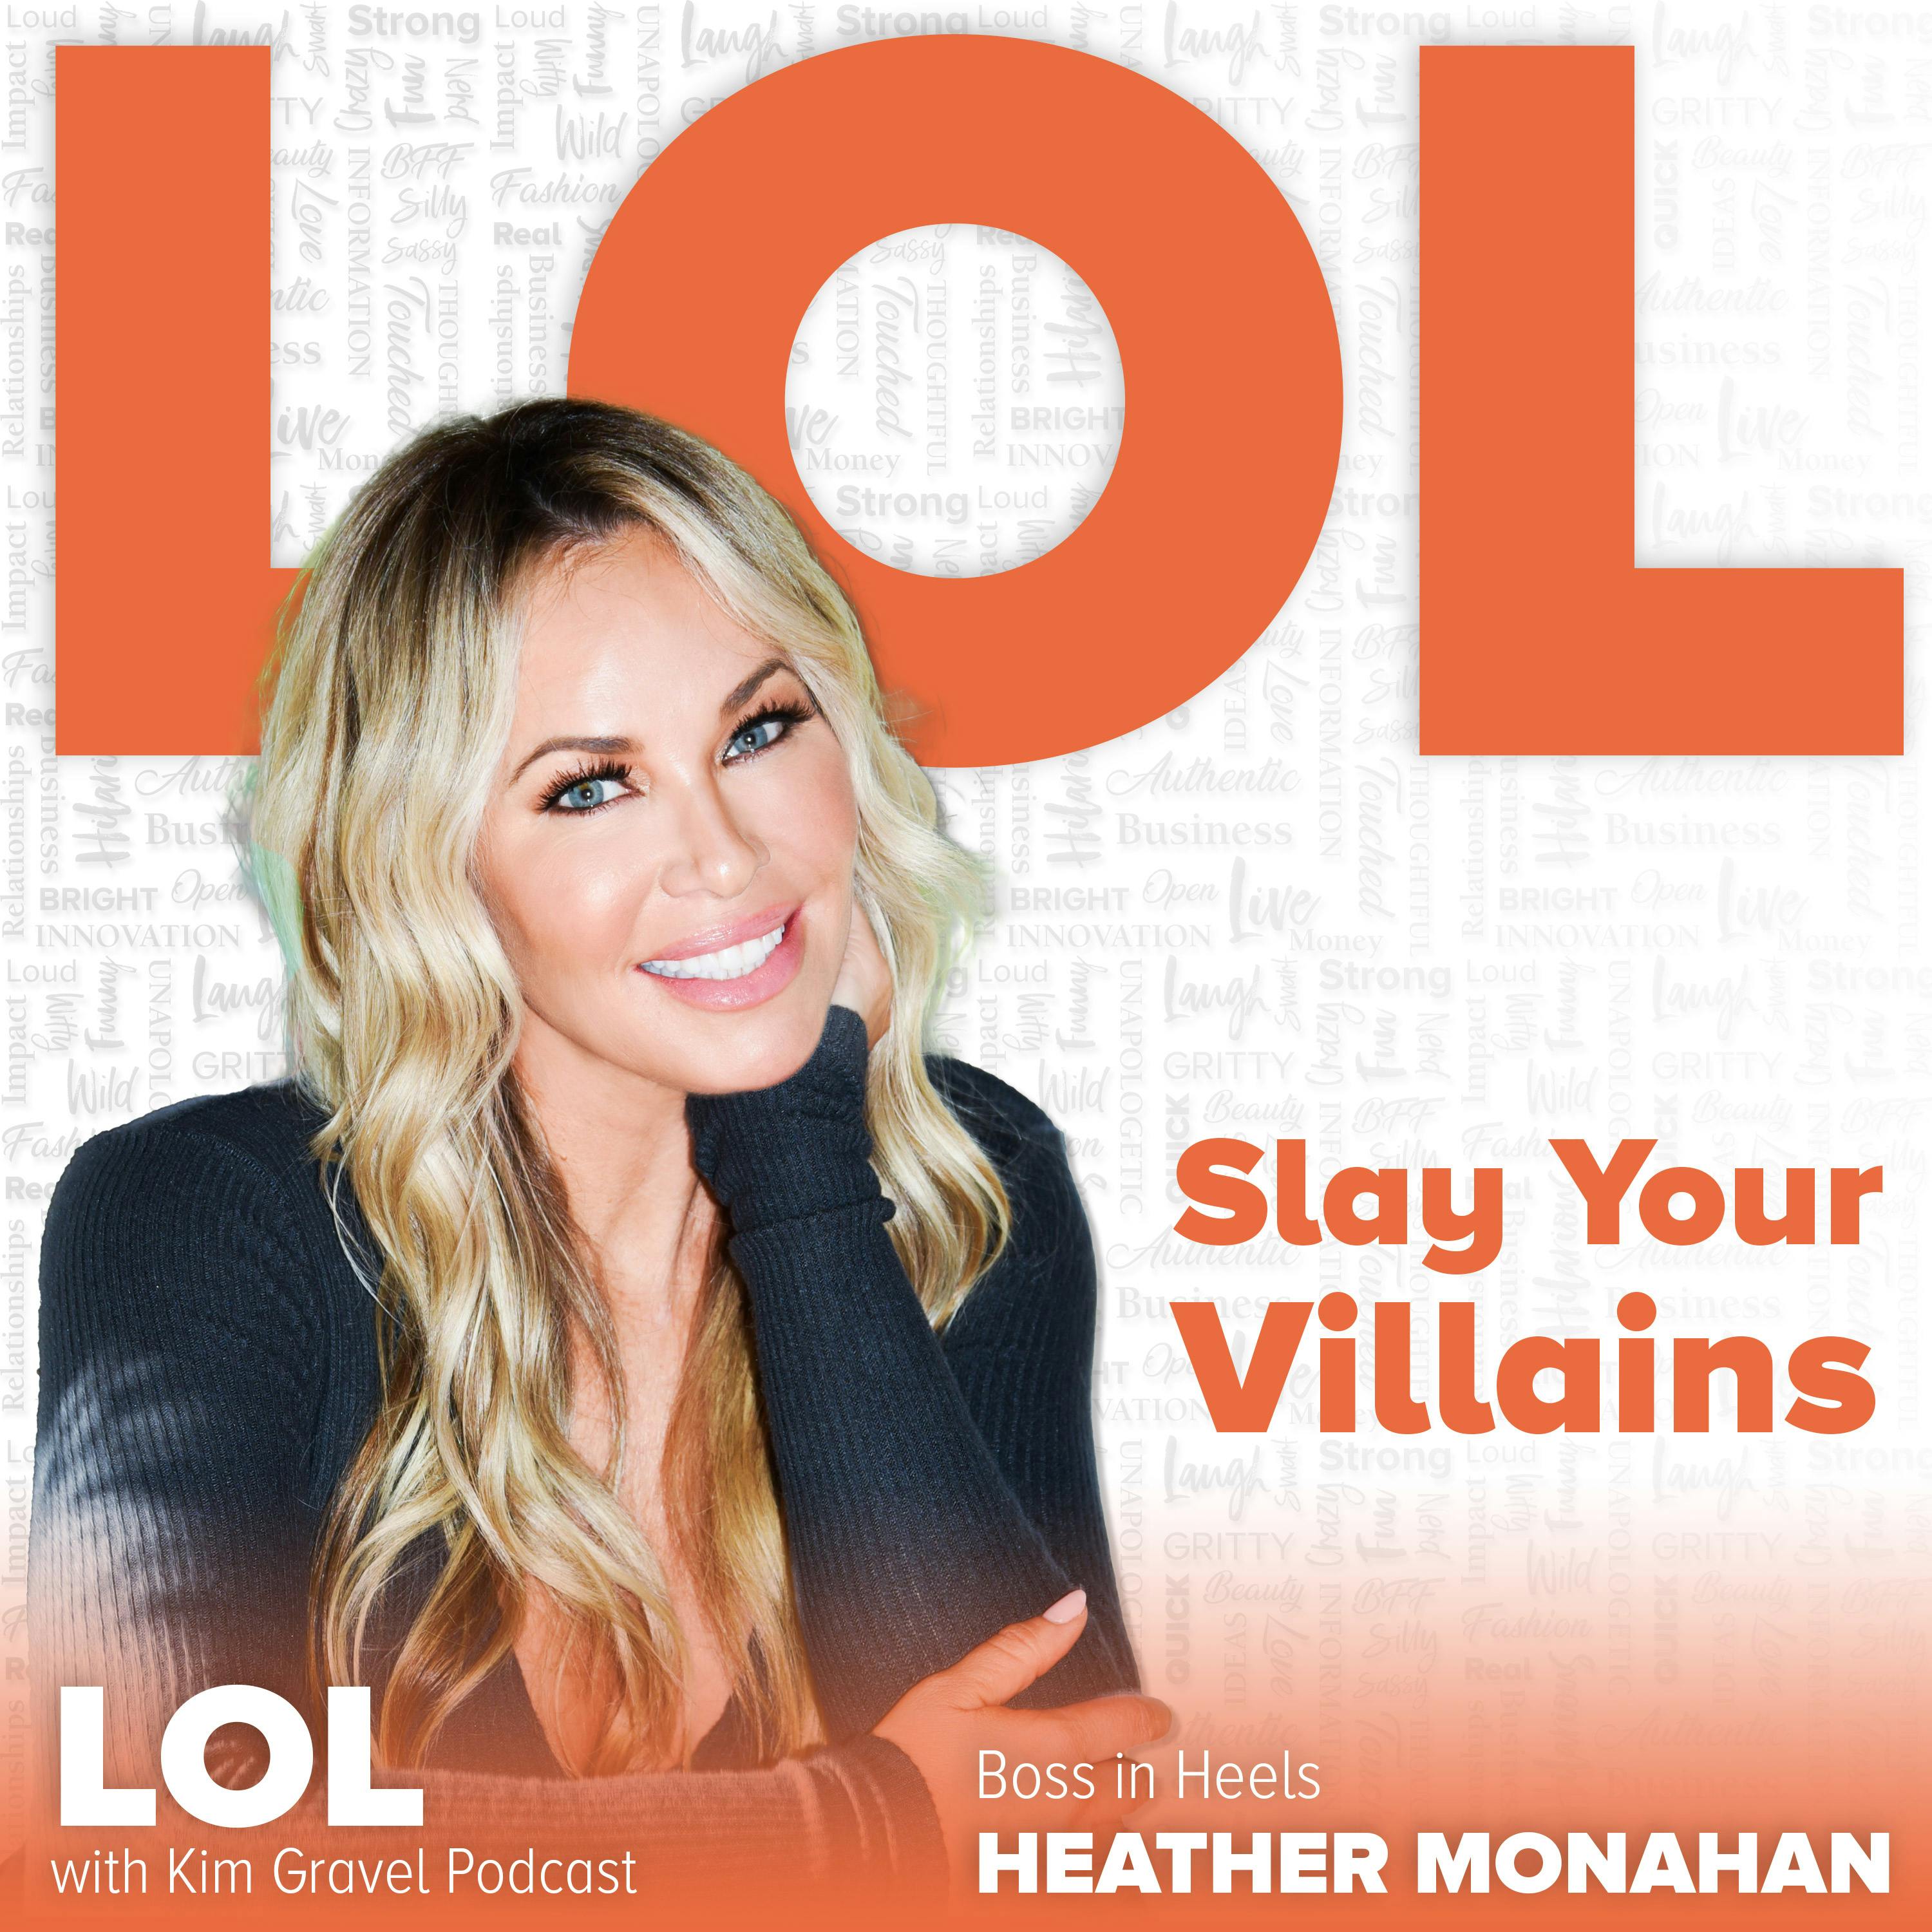 Slay Your Villains with Heather Monahan Image